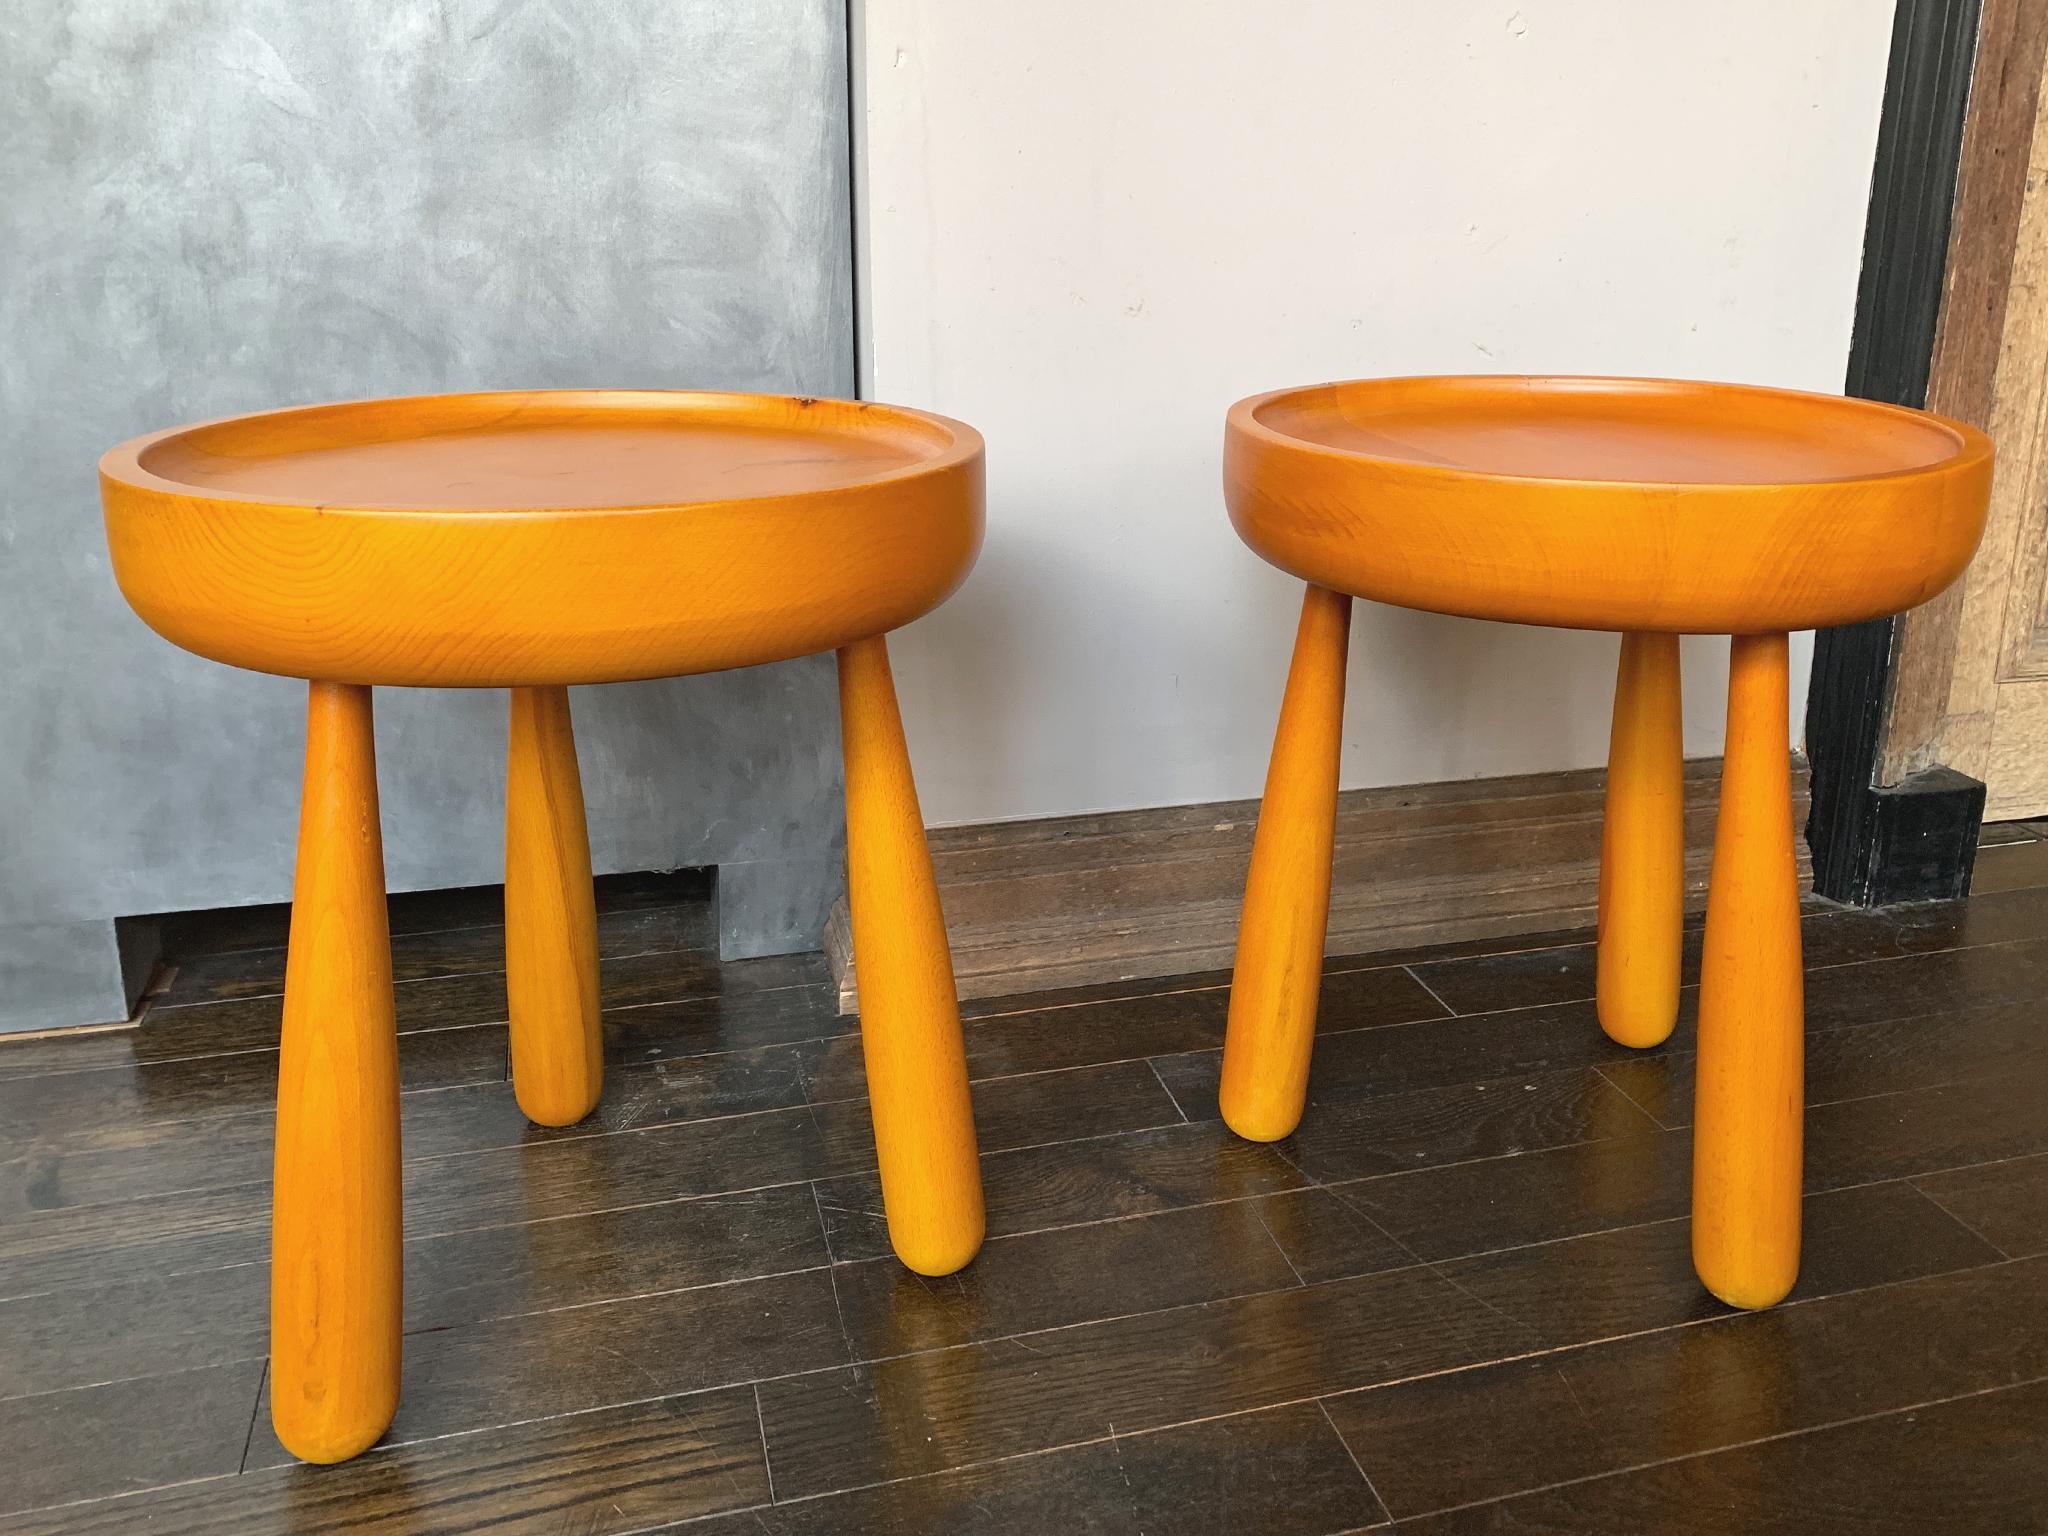 20th Century Pair of Dish-Top Stool Side Tables in the Style of Sergio Rodrigues